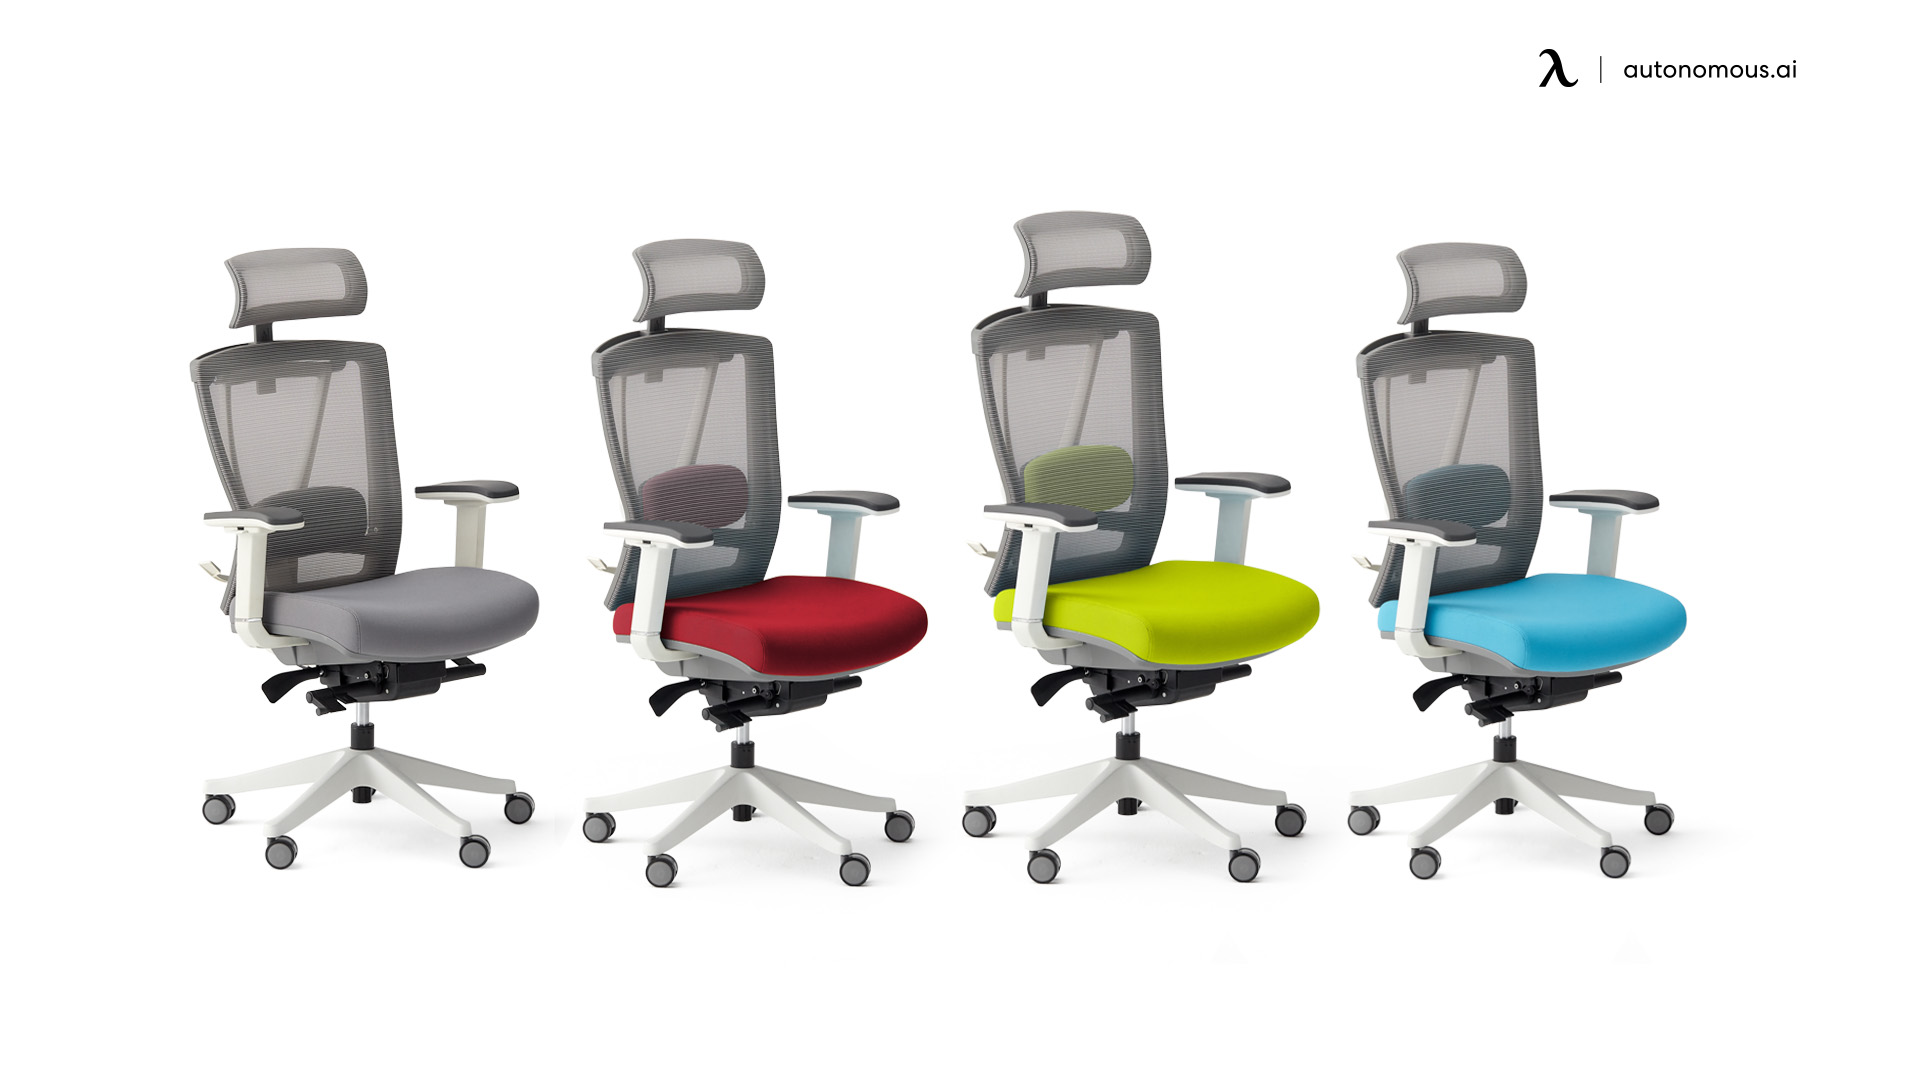 ErgoChair Pro colorful office chair